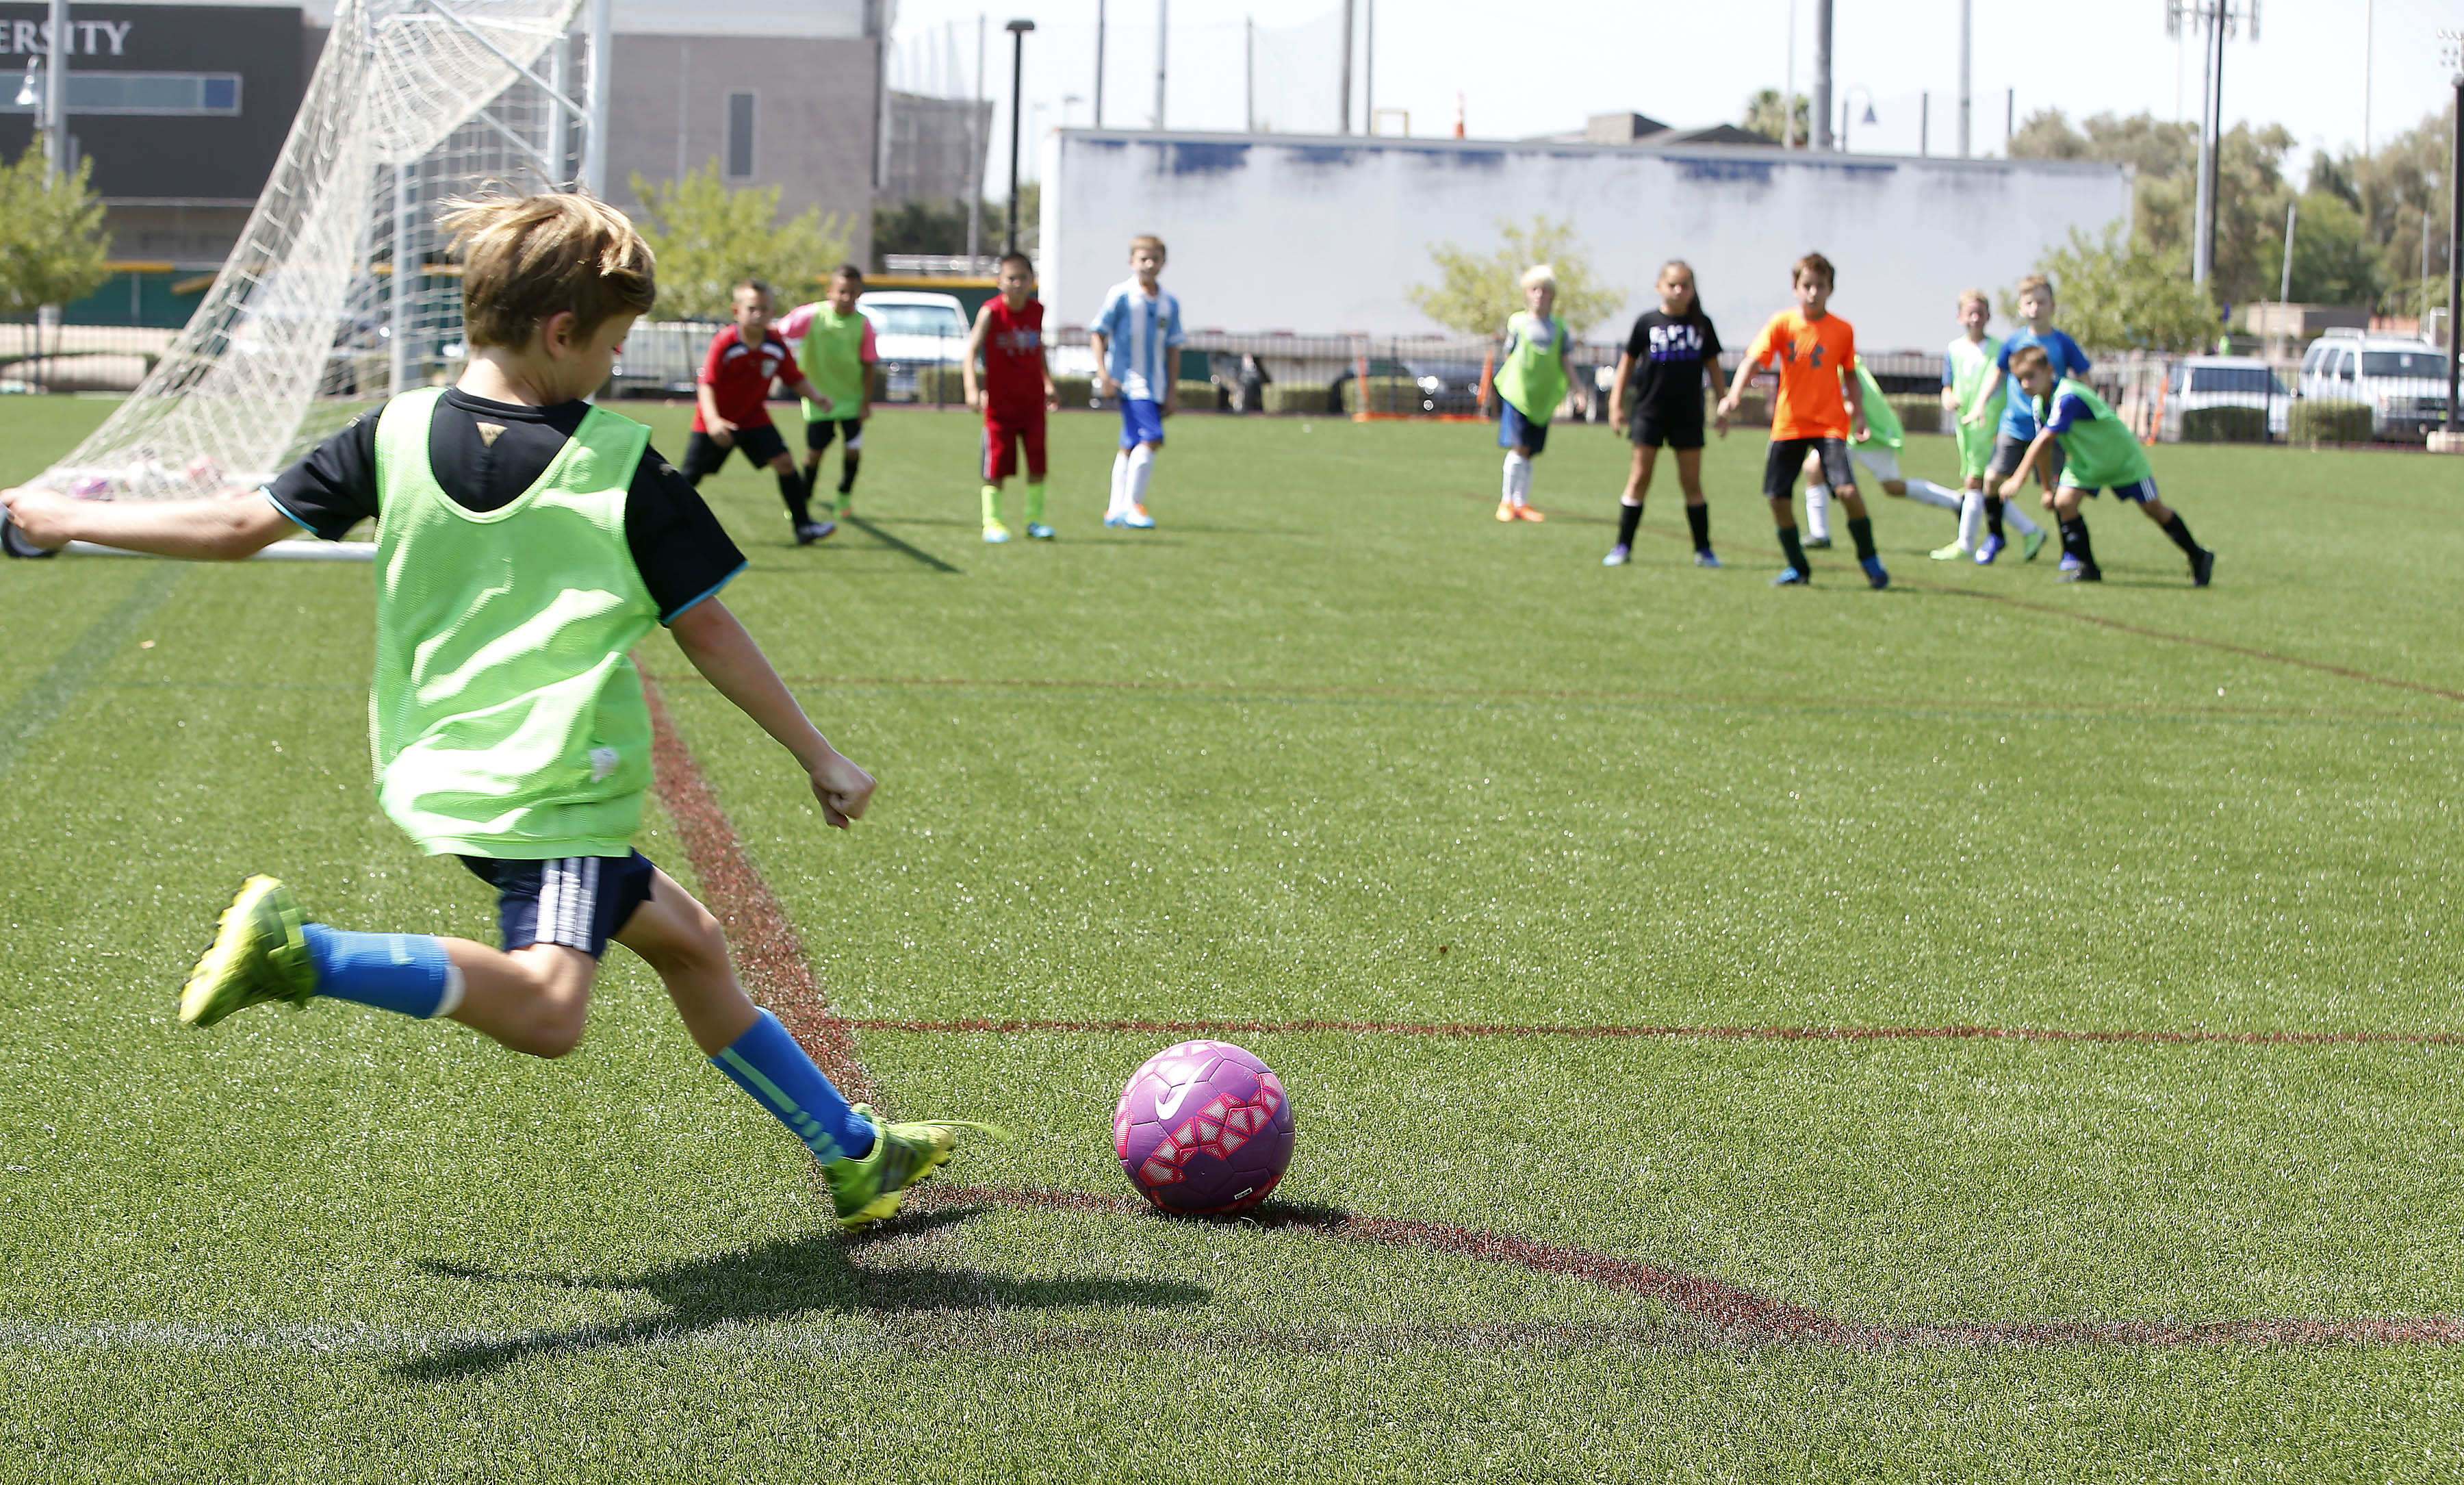 GCU Summer Soccer Camps have variety of options GCU Today